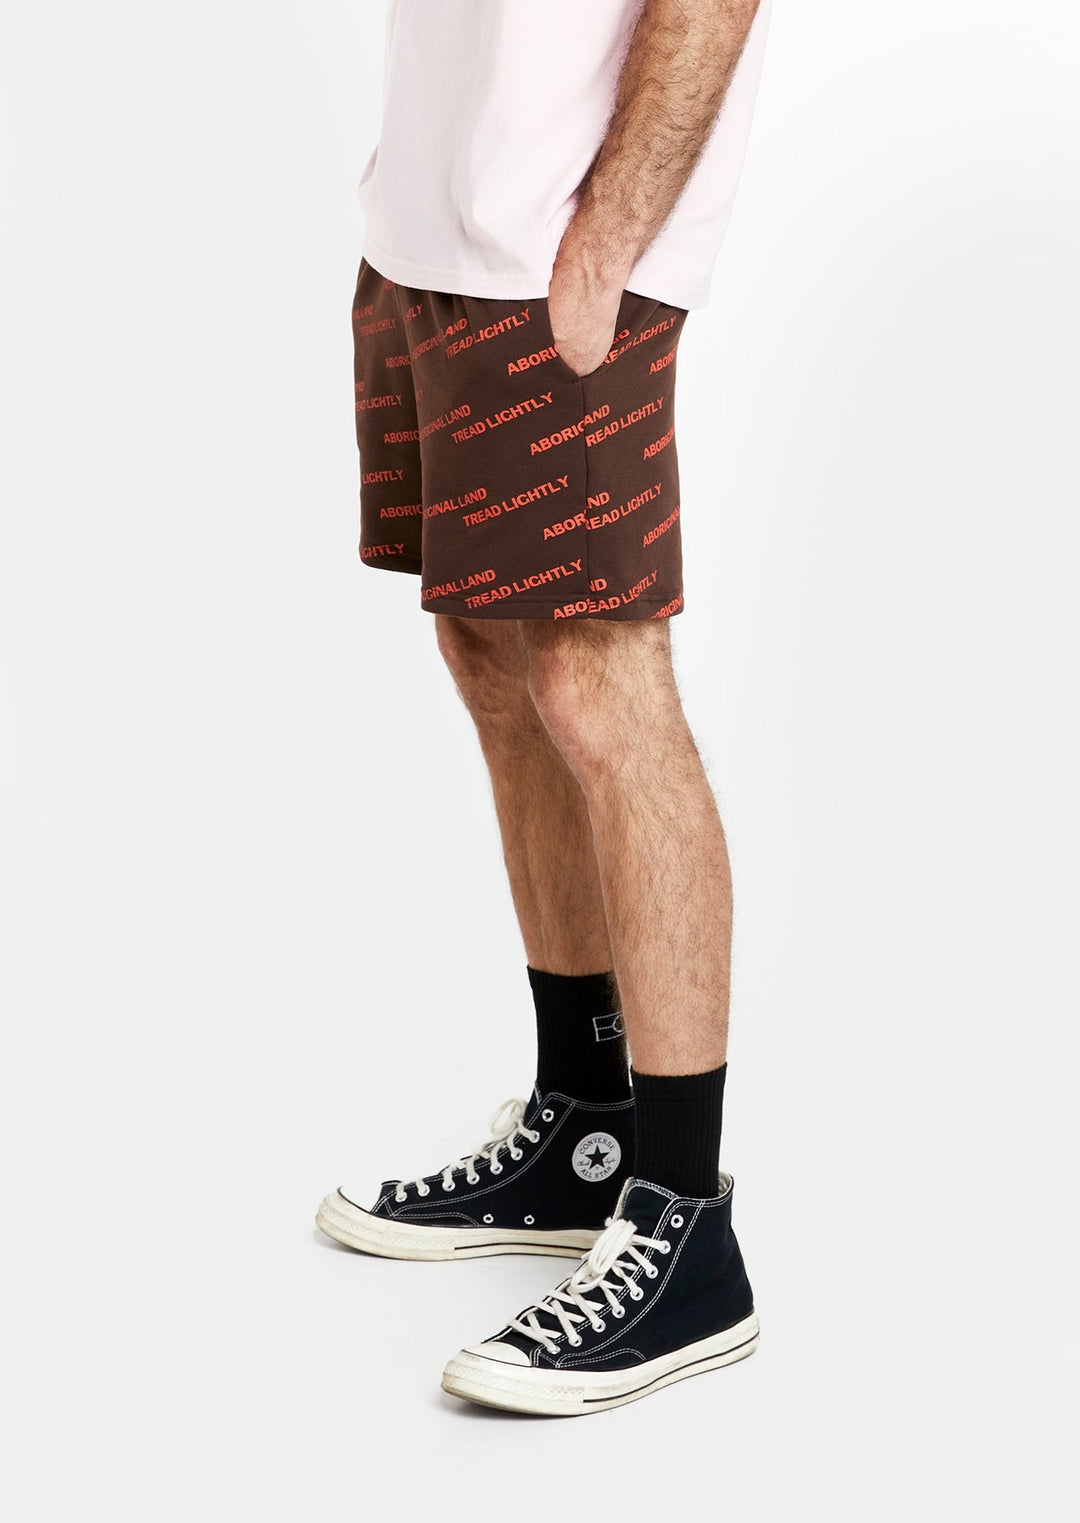 Clothing The Gaps. Orange Tread Lightly shorts. Brown shorts with repeating pattern all over crew of the words 'Aboriginal Land Tread Lightly' text in a orange colour. Includes solid brown elastic waist with brown drawstrings and has 2 deep pockets on both sides.